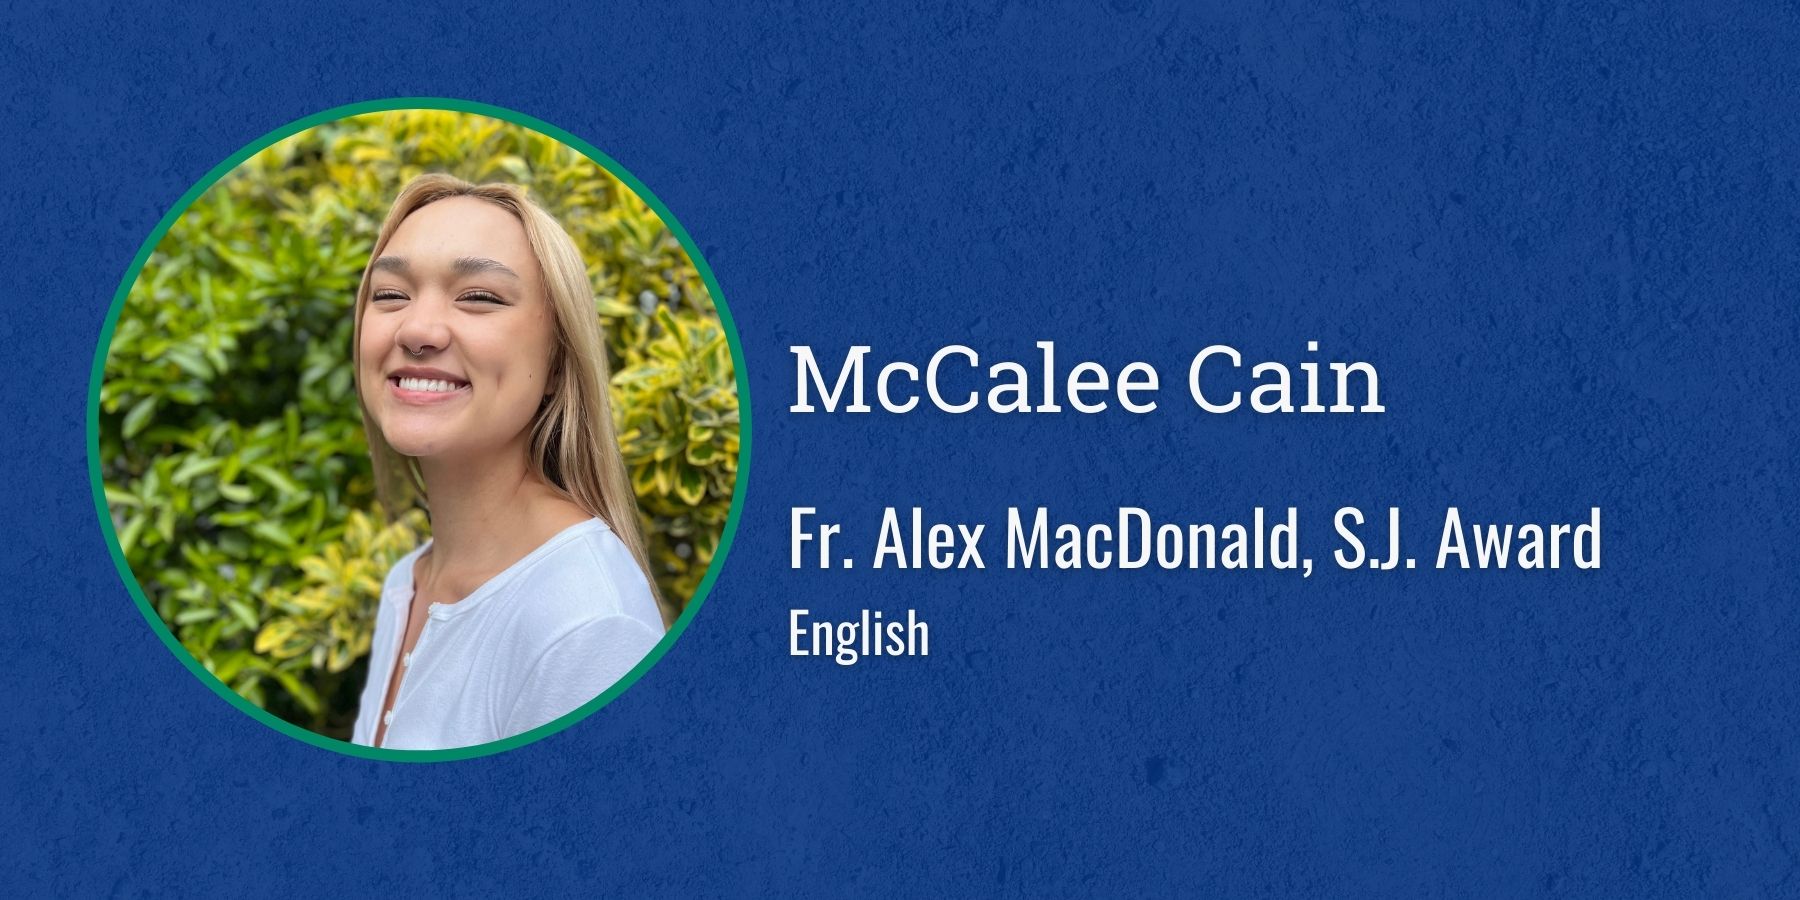 photo of McCalee Cain and text